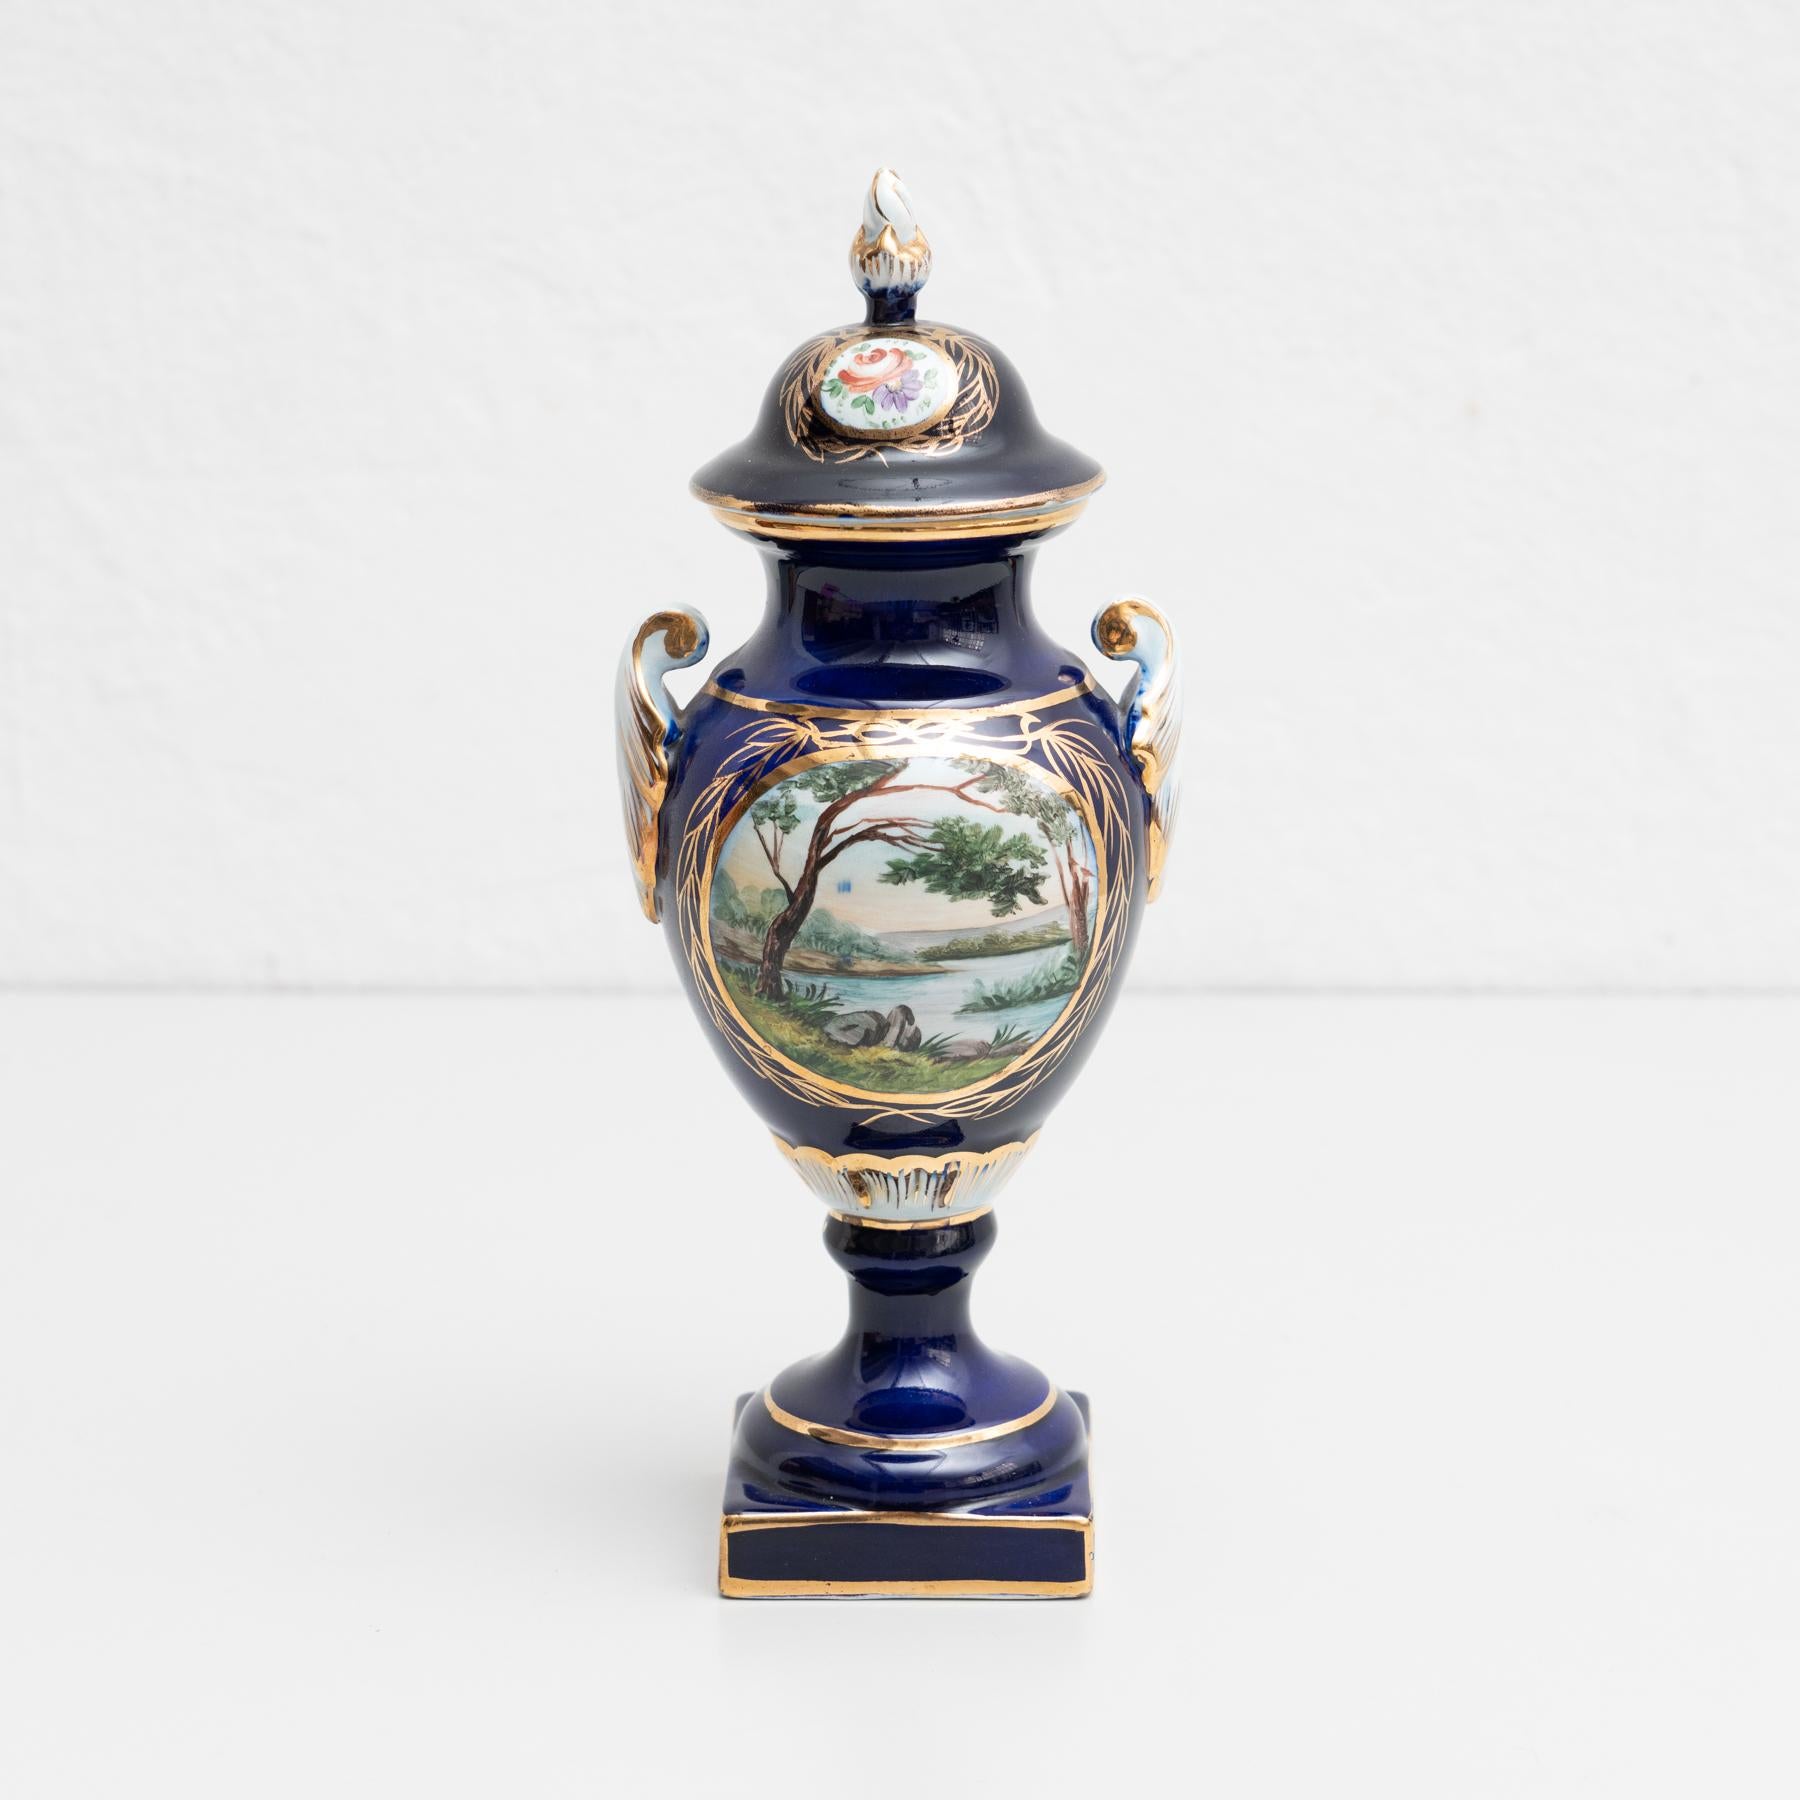 Isabelline hand-painted porcelain vase in the Serves style. Beautifully decorated with a nice scene on the front side. The vase features a lid that can be lifted off.

Made by unknown manufacturer in France, circa 19th Century.

In original